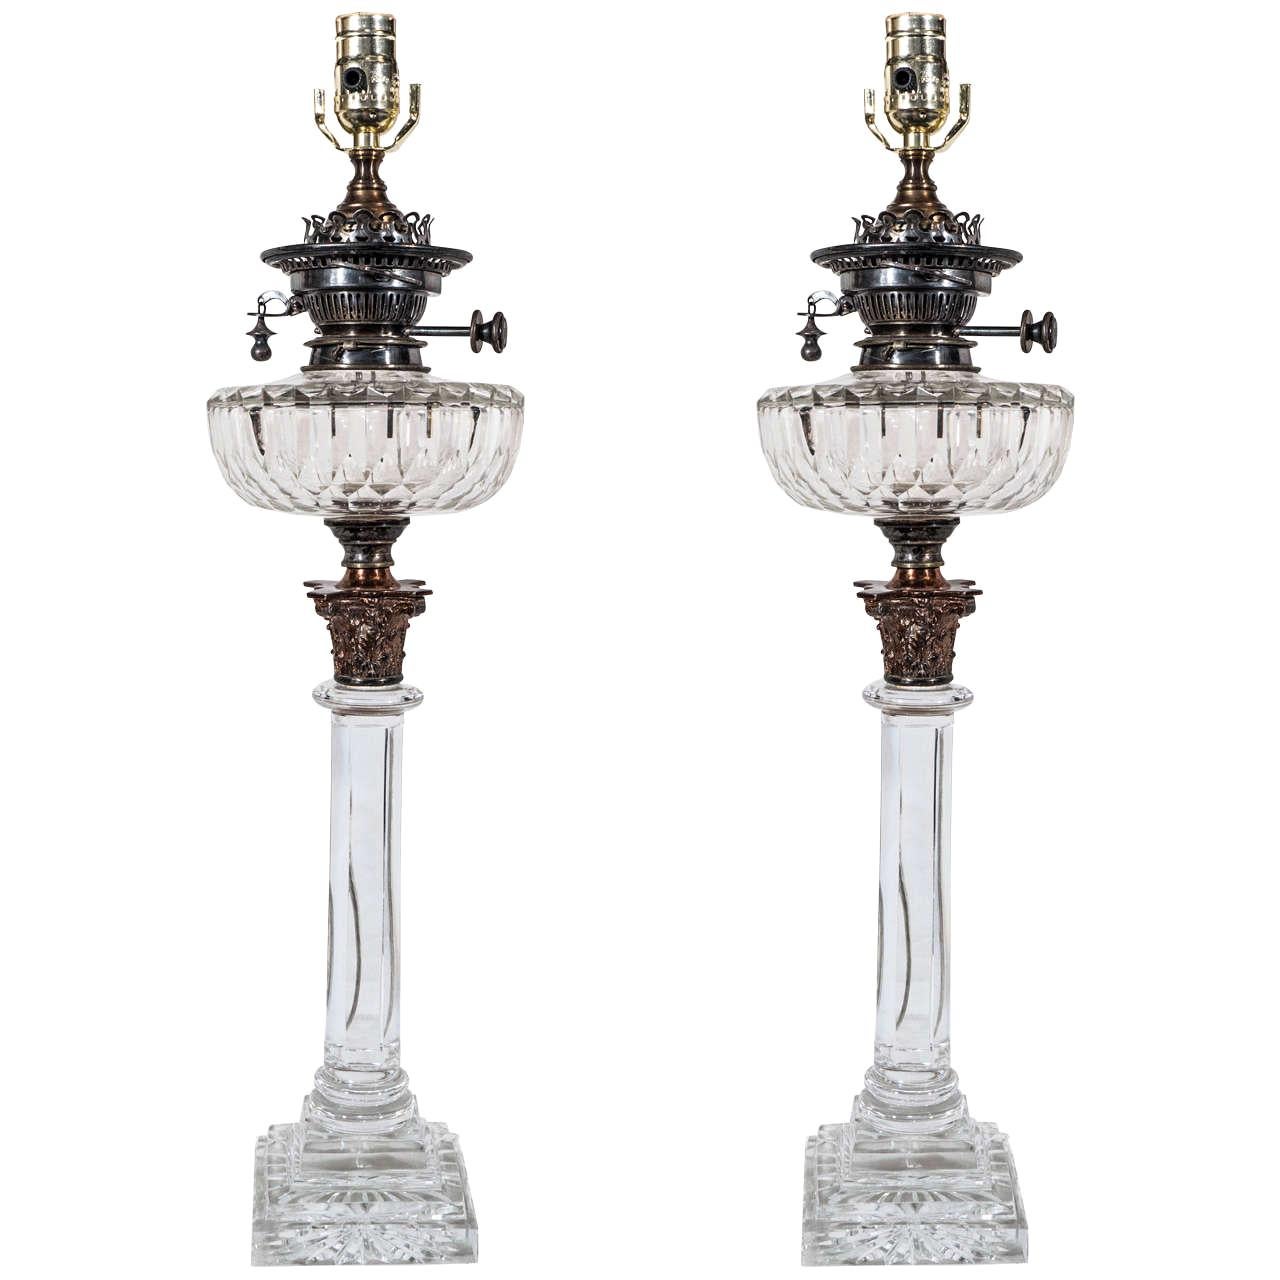 Pair of English Cut-Glass Oil Lamps Made Late 19th Century Now with New Wiring